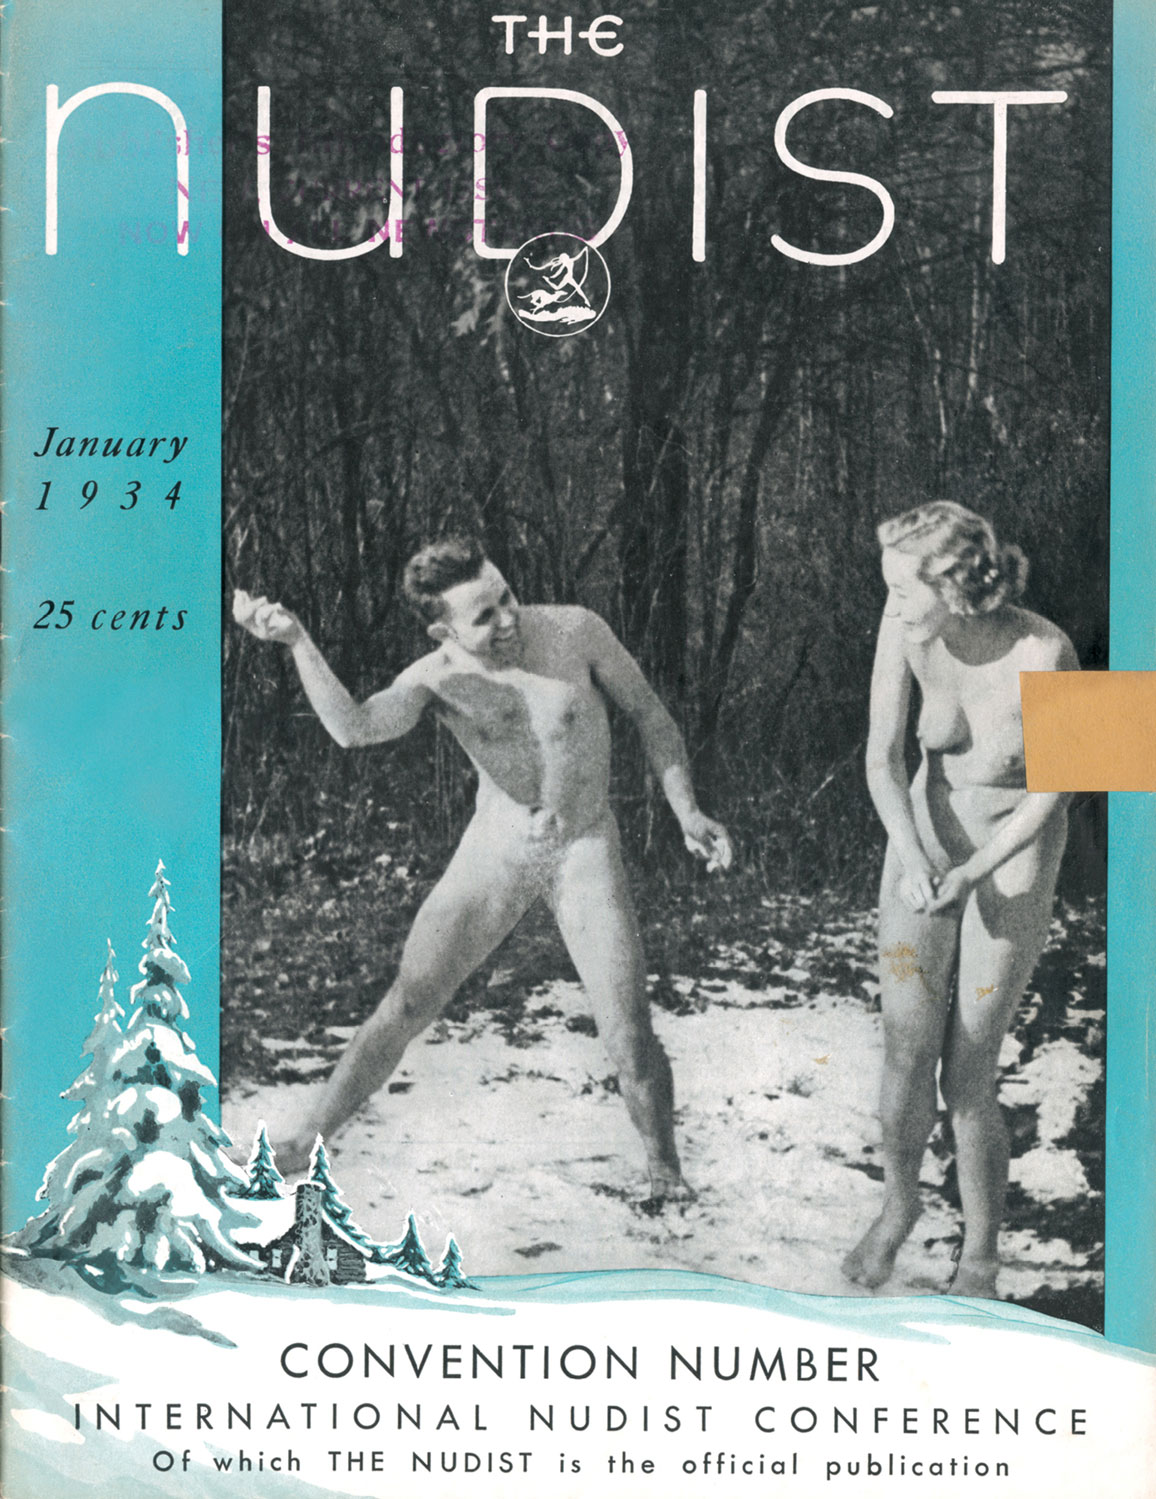 Nudist magazine cover depicting a naked man throwing a snowball at a naked woman, their genitalia edited out.